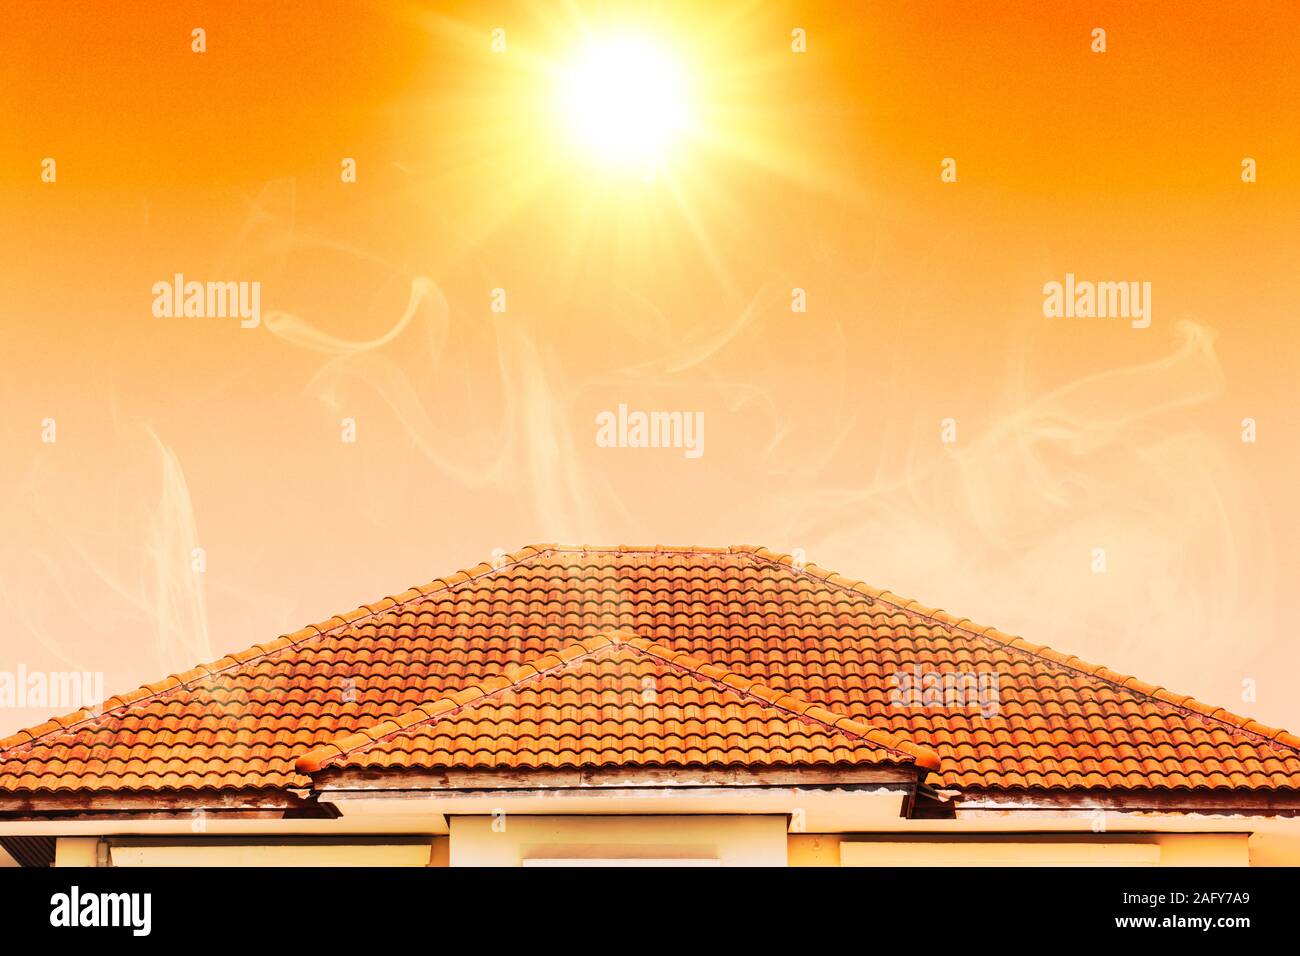 Hot weather in summer overheat home roof from sun burn. Stock Photo